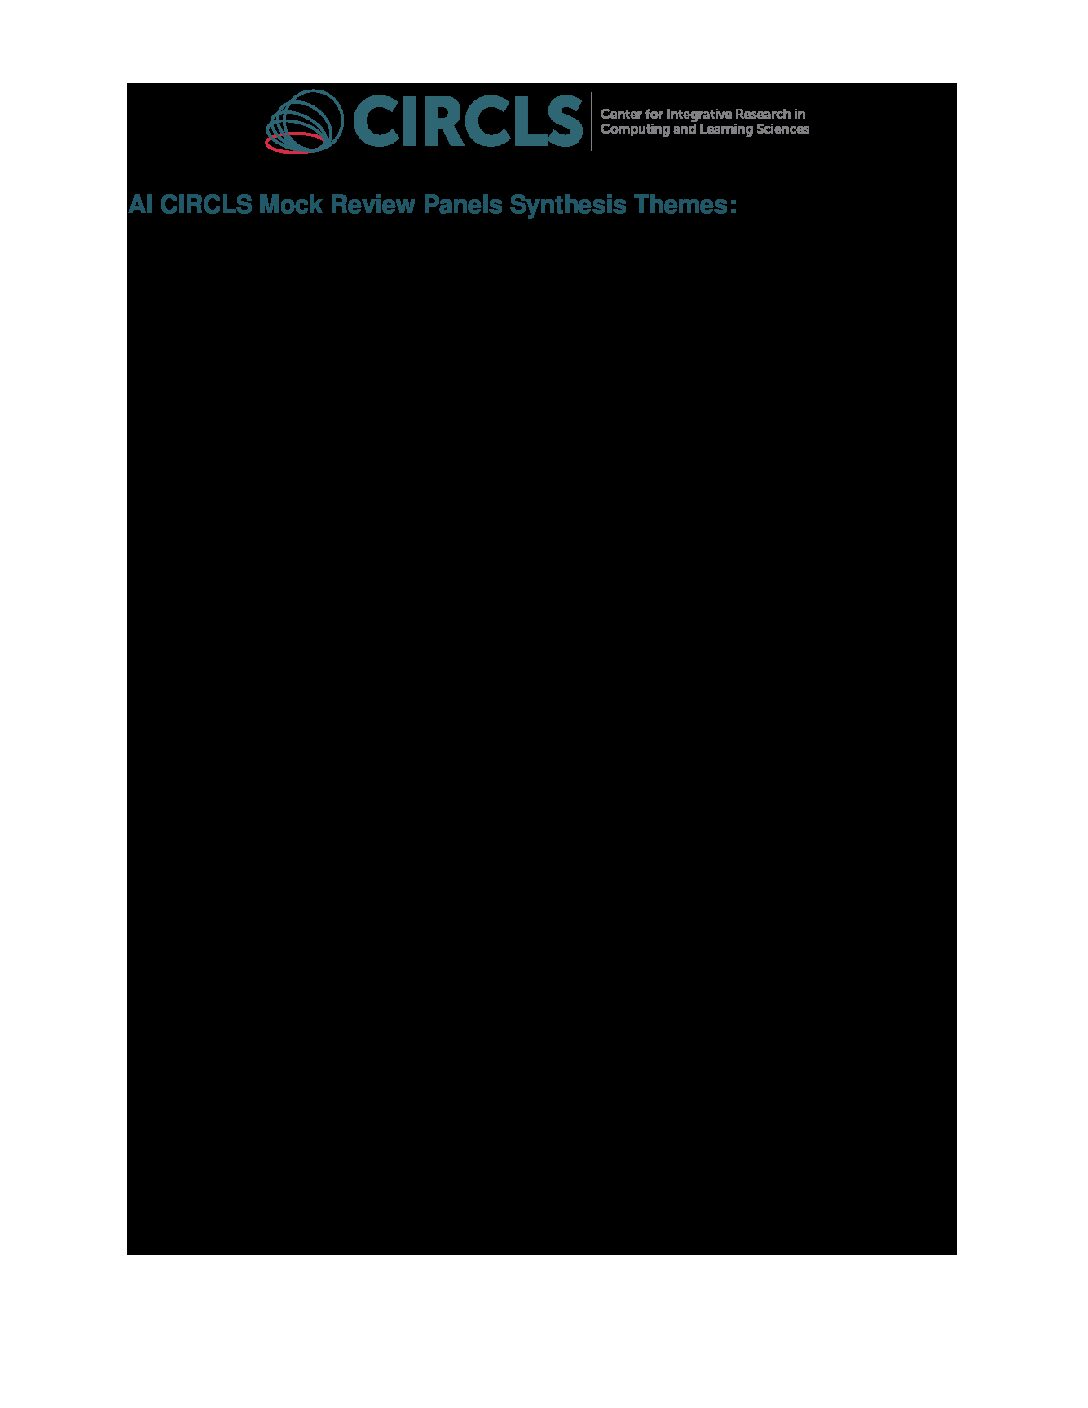 Summary of Synthesis Themes